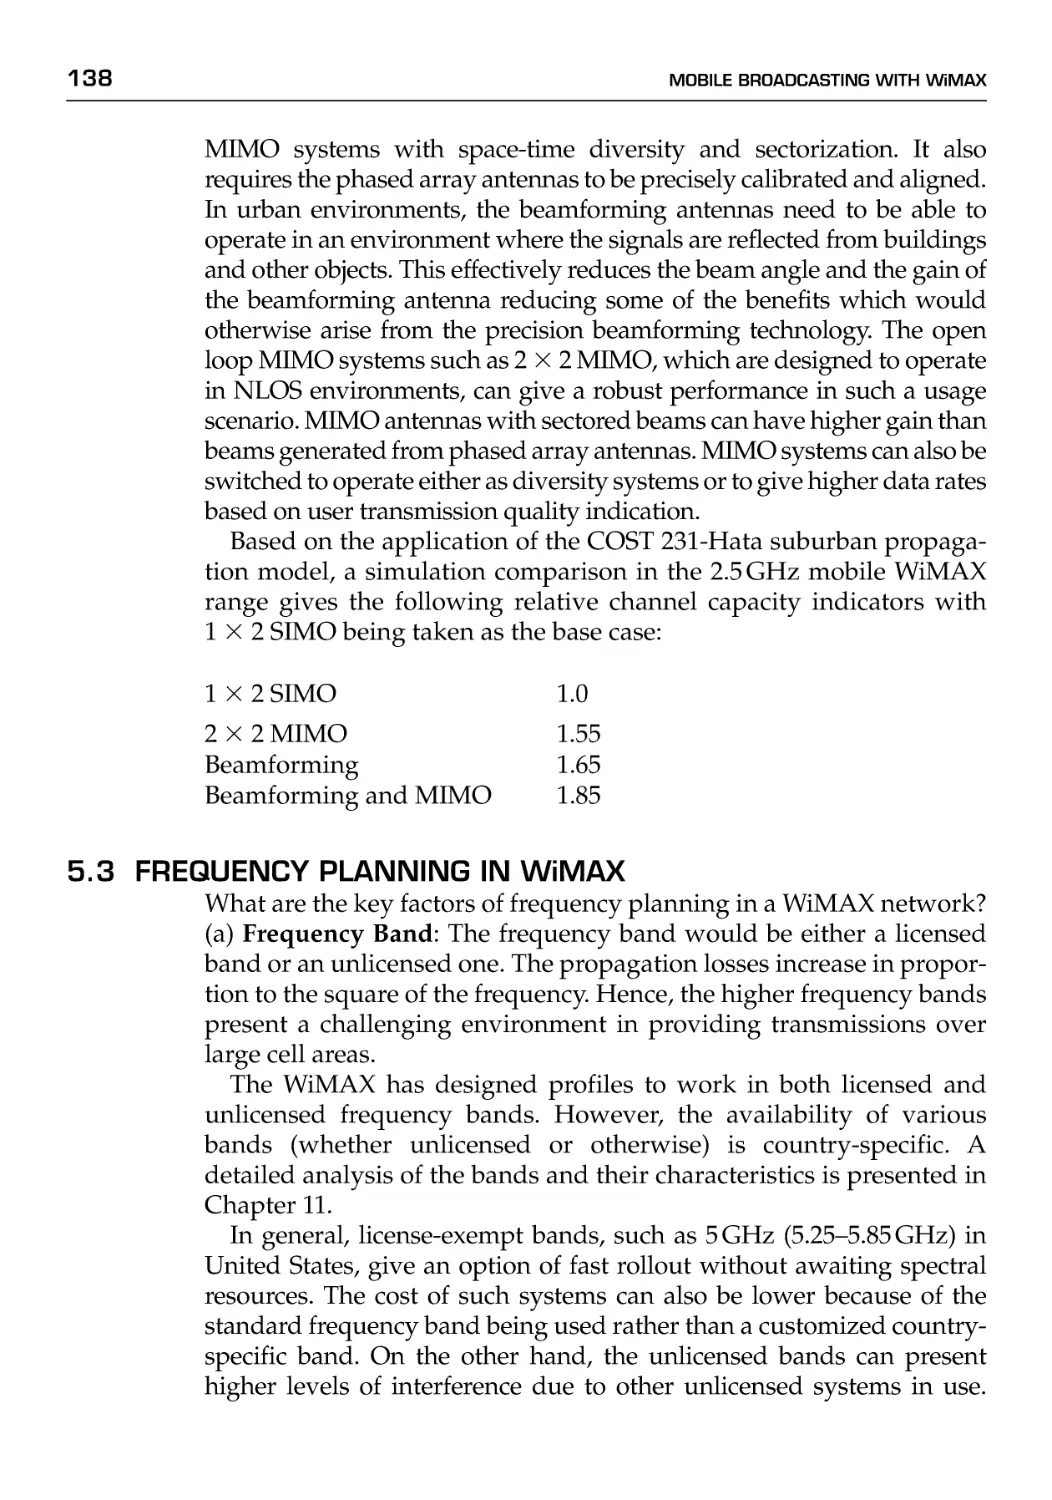 5.3 Frequency Planning in WiMAX